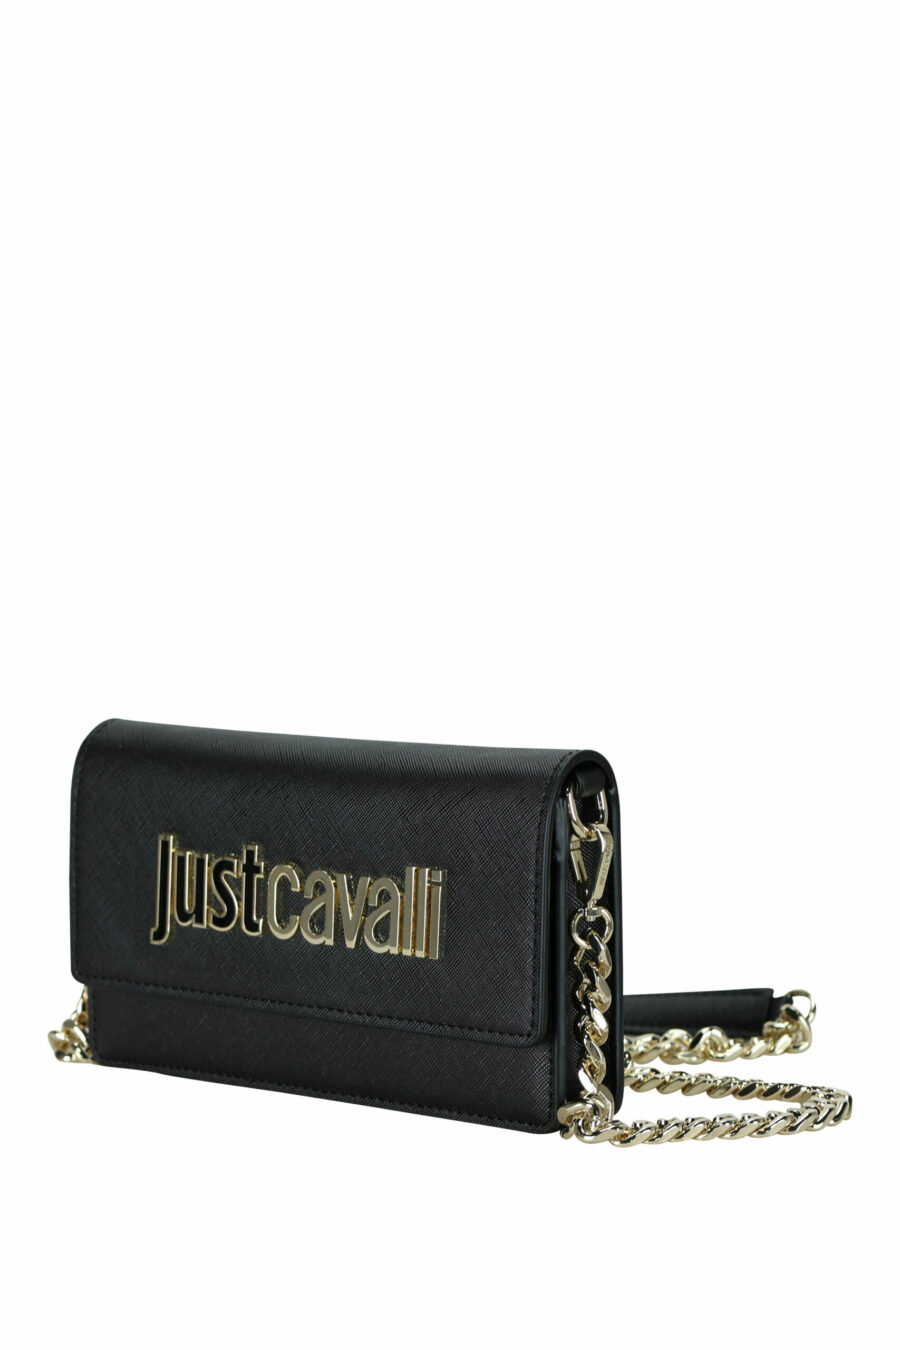 Mini wallet black with chain and logo "lettering" - 8052672736024 1 scaled